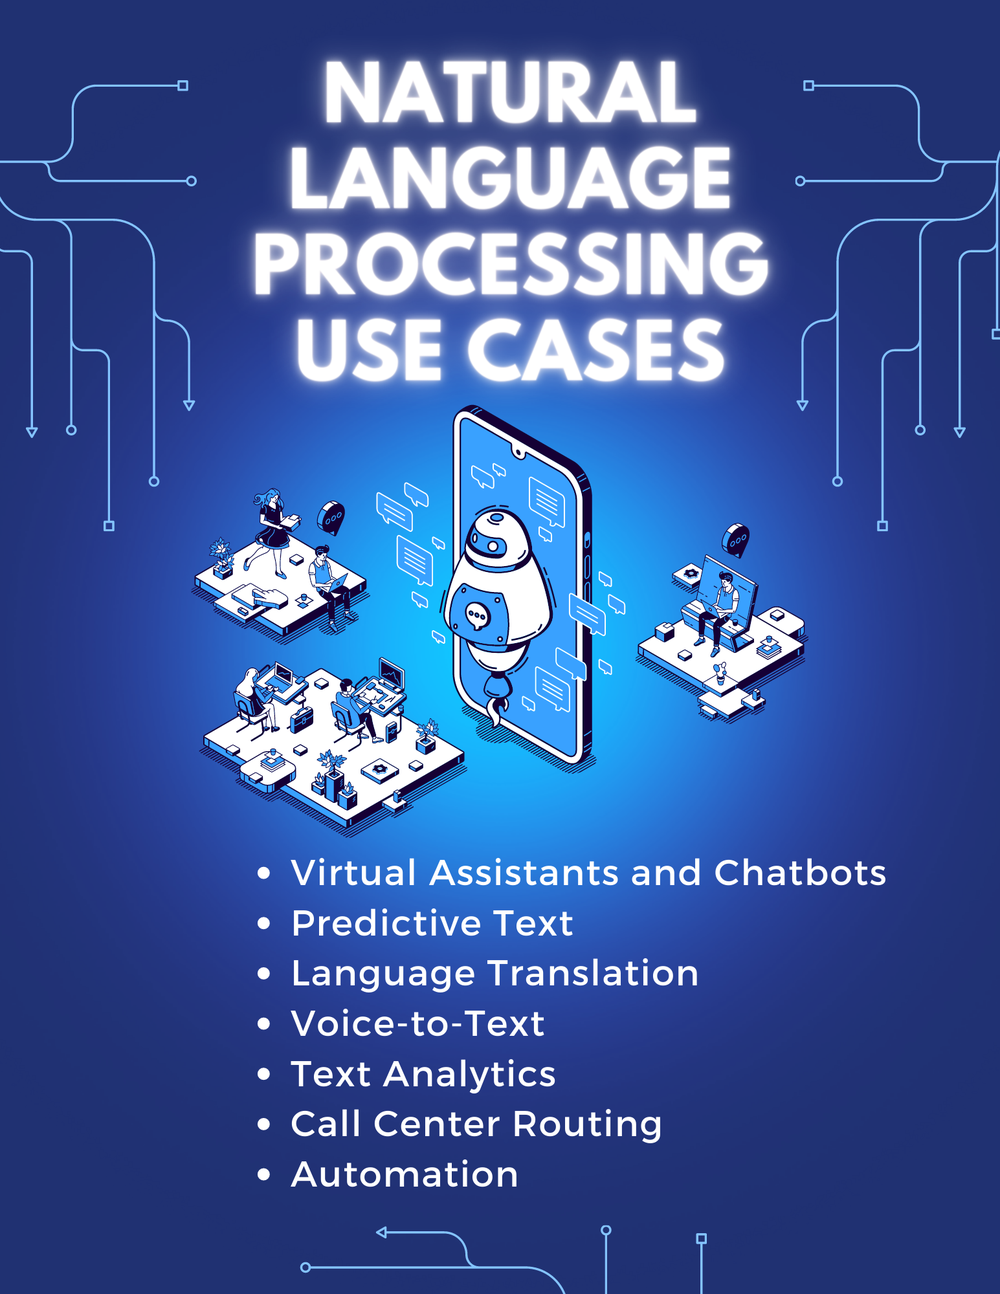 Natural Language Processing Use Cases.